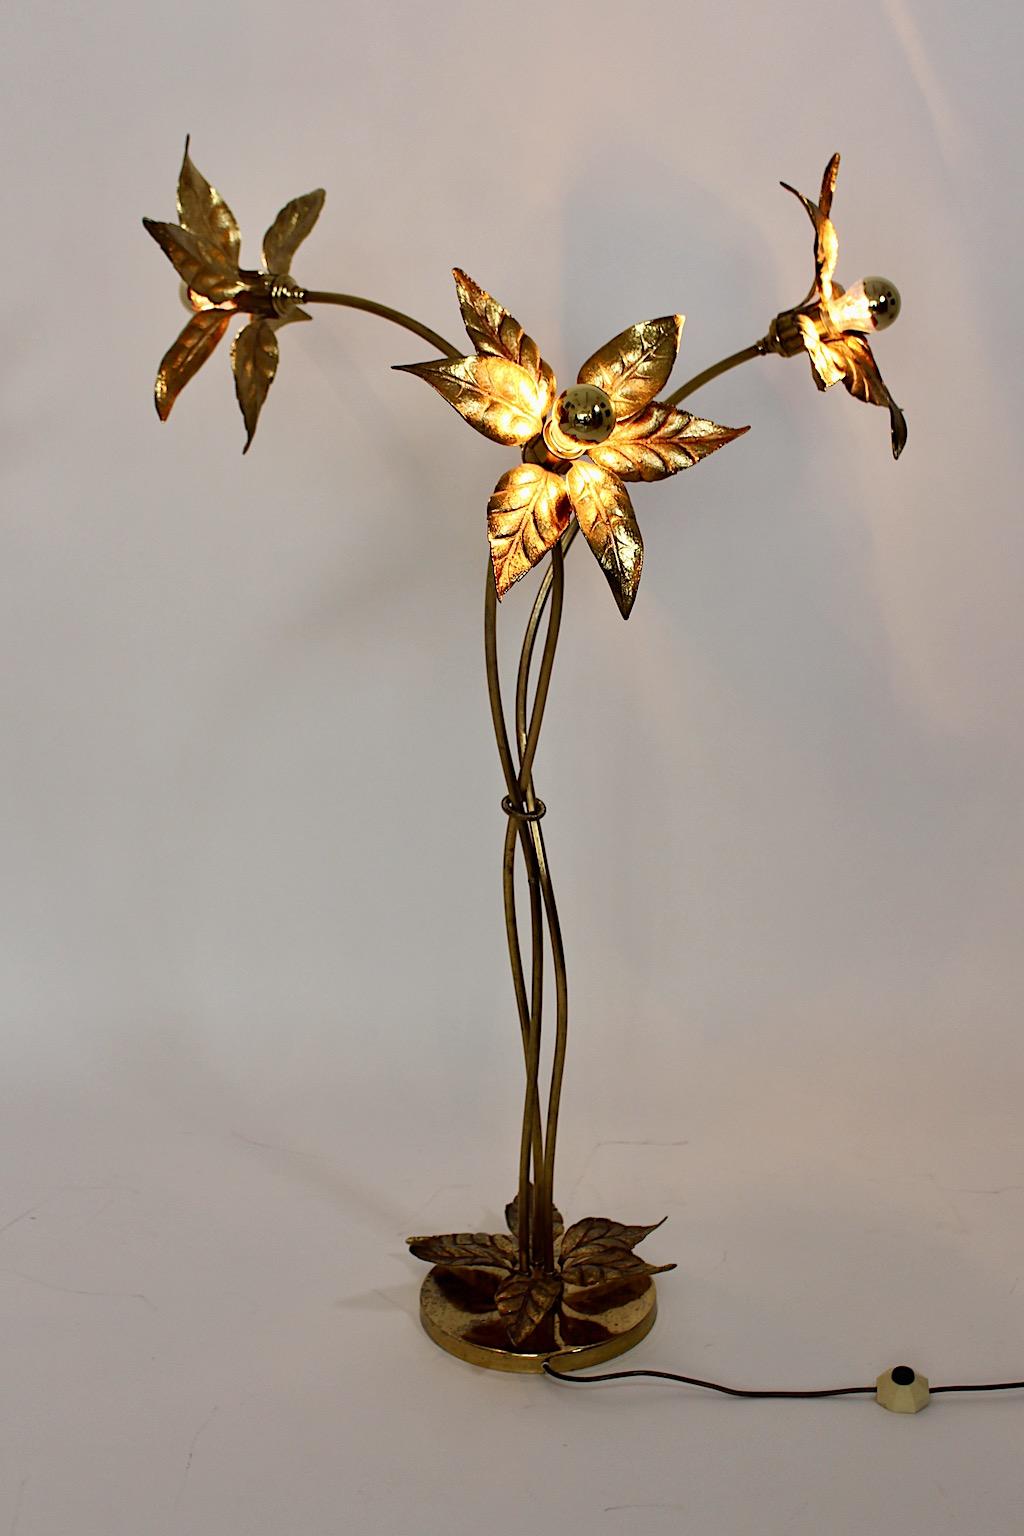 Hollywood regency Style vintage floor lamp in flower organic shape from gilded brass and metal by Willy Daro 1970s Belgium.
An amazing flower like floor lamp in golden color from gilded brass and metal with slightly curved stems and a circular